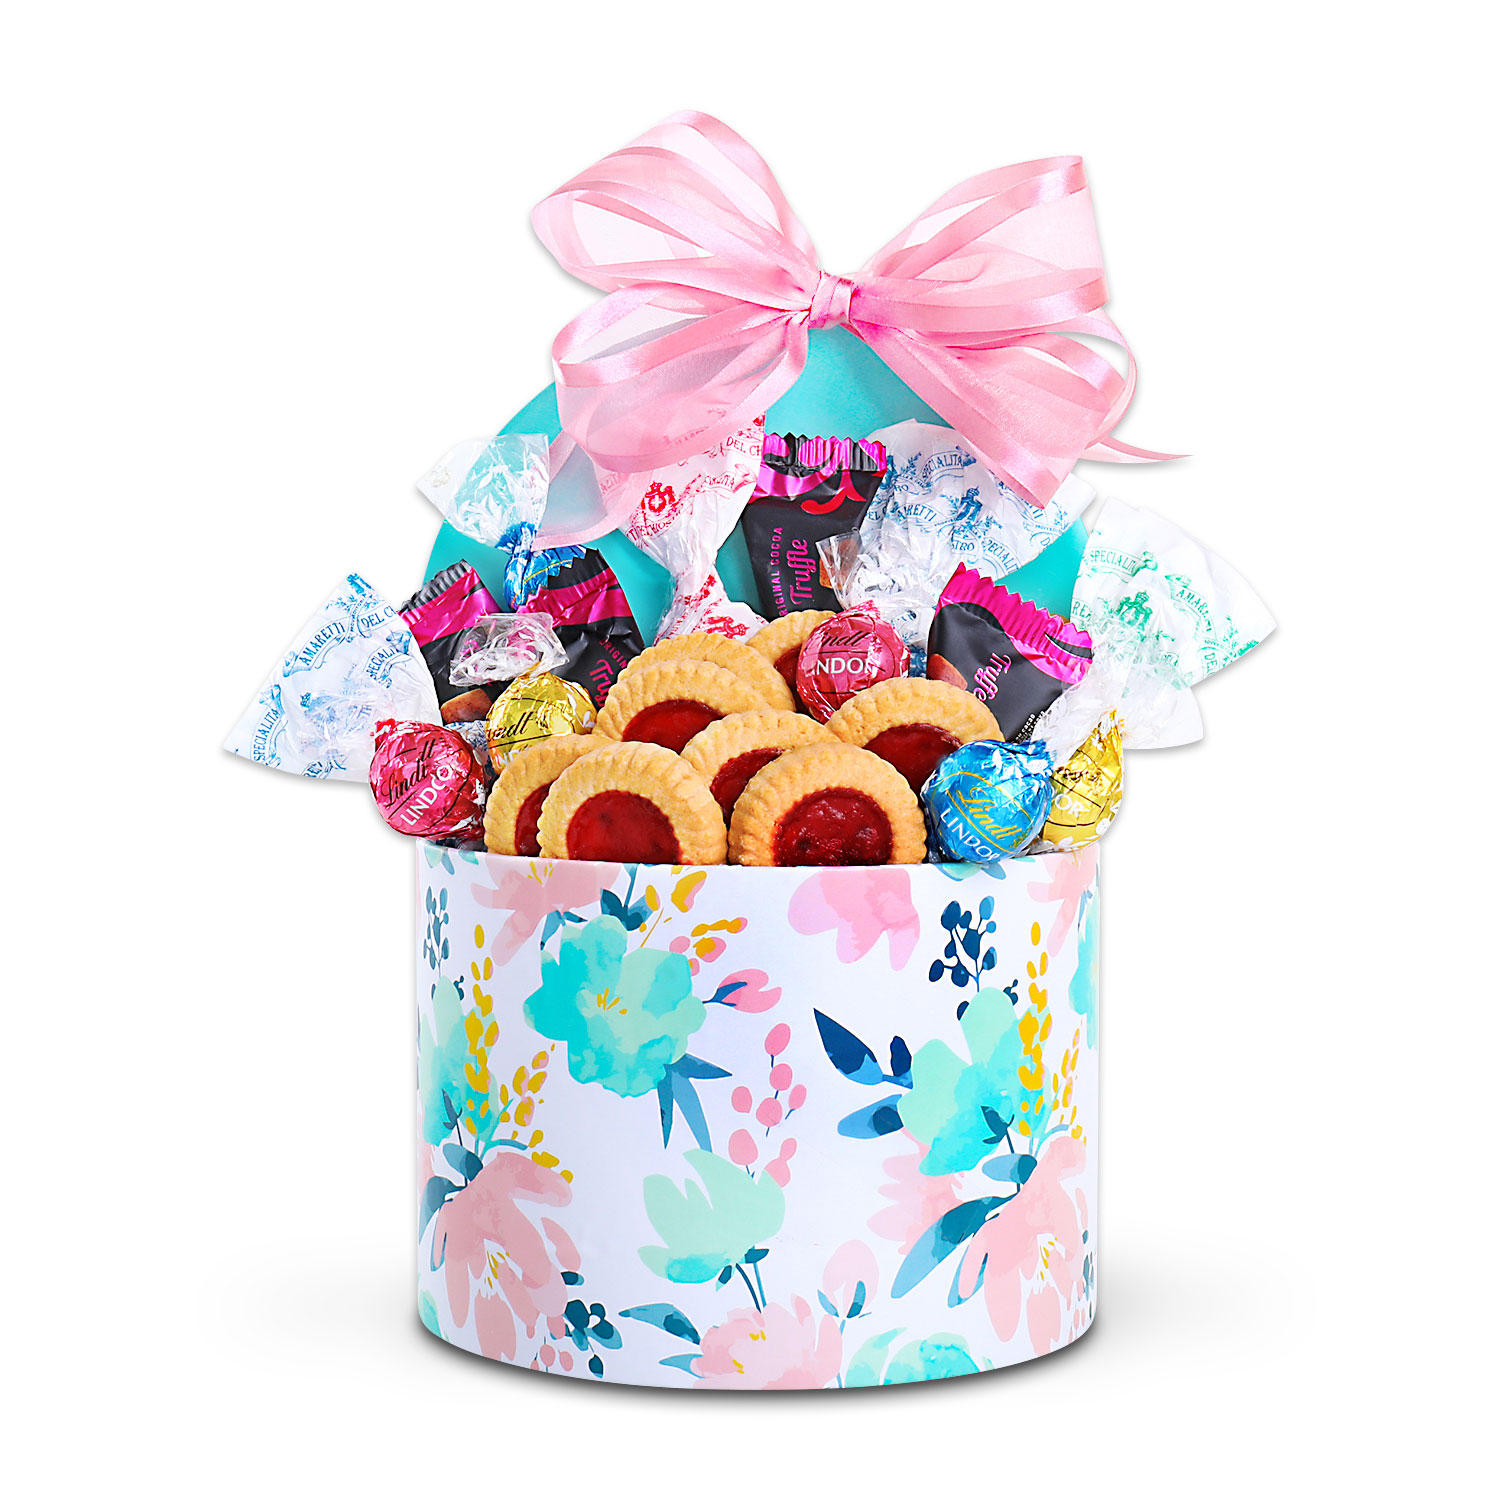 Cookies and Chocolates for Mom by Alder Creek Gifts